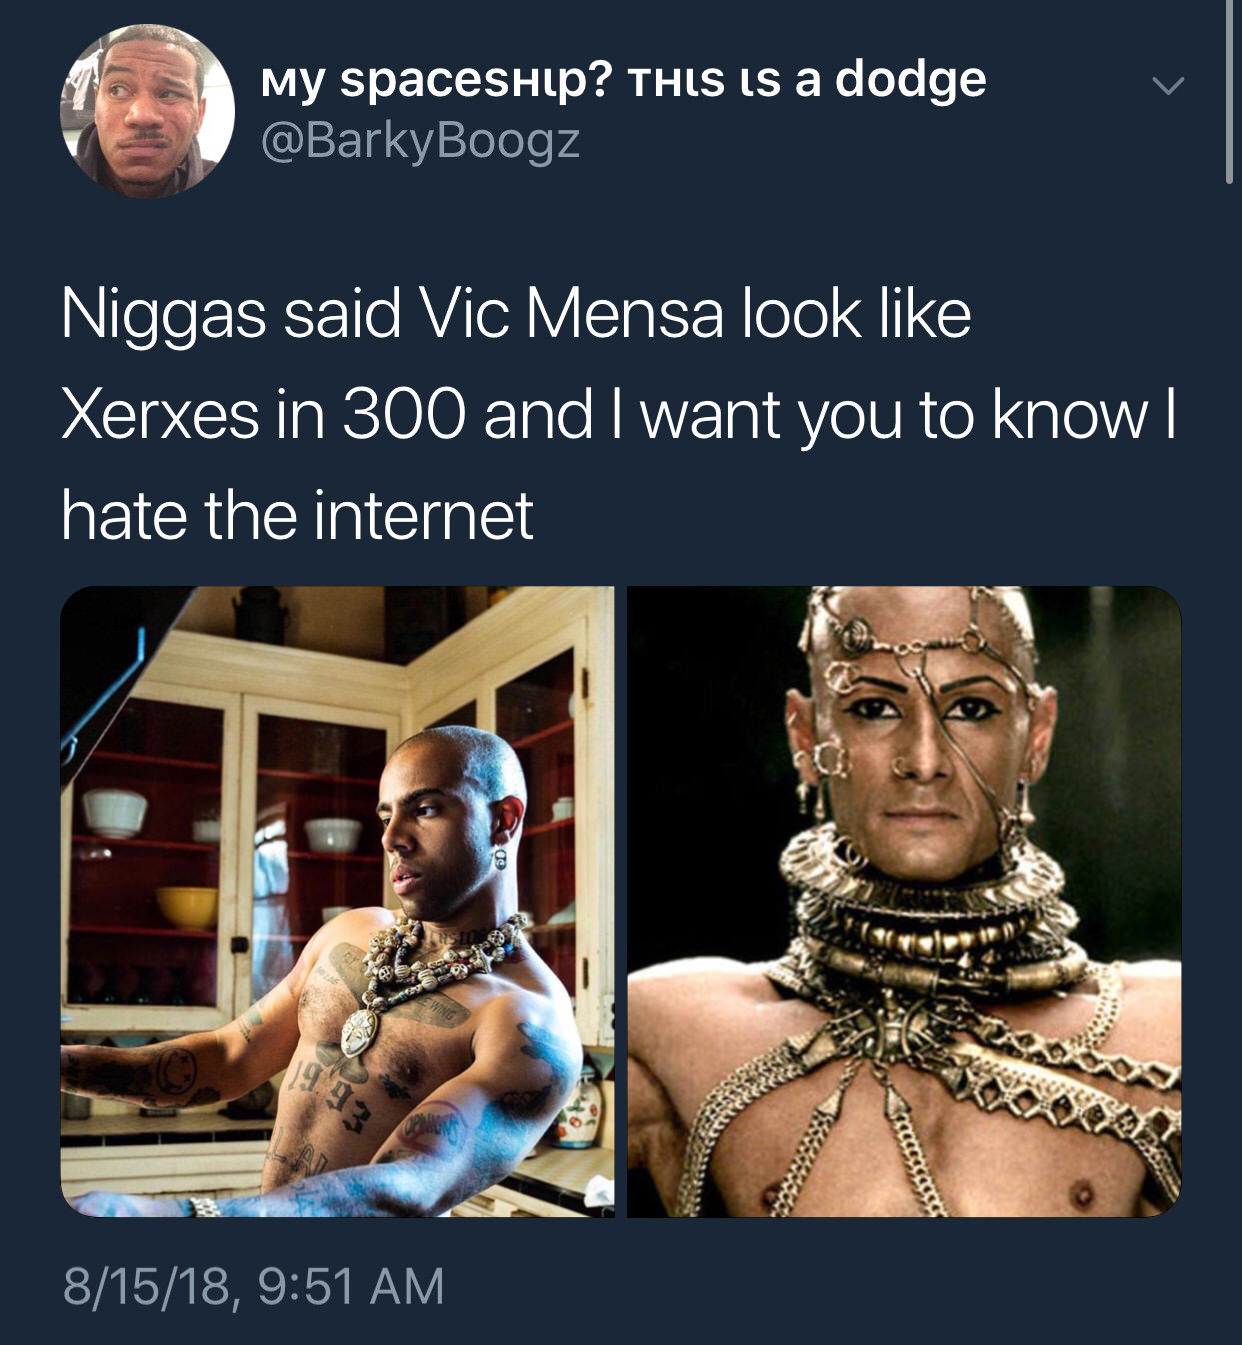 muscle - My spaceship? Thls Ls a dodge Niggas said Vic Mensa look Xerxes in 300 and I want you to know | hate the internet 81518,